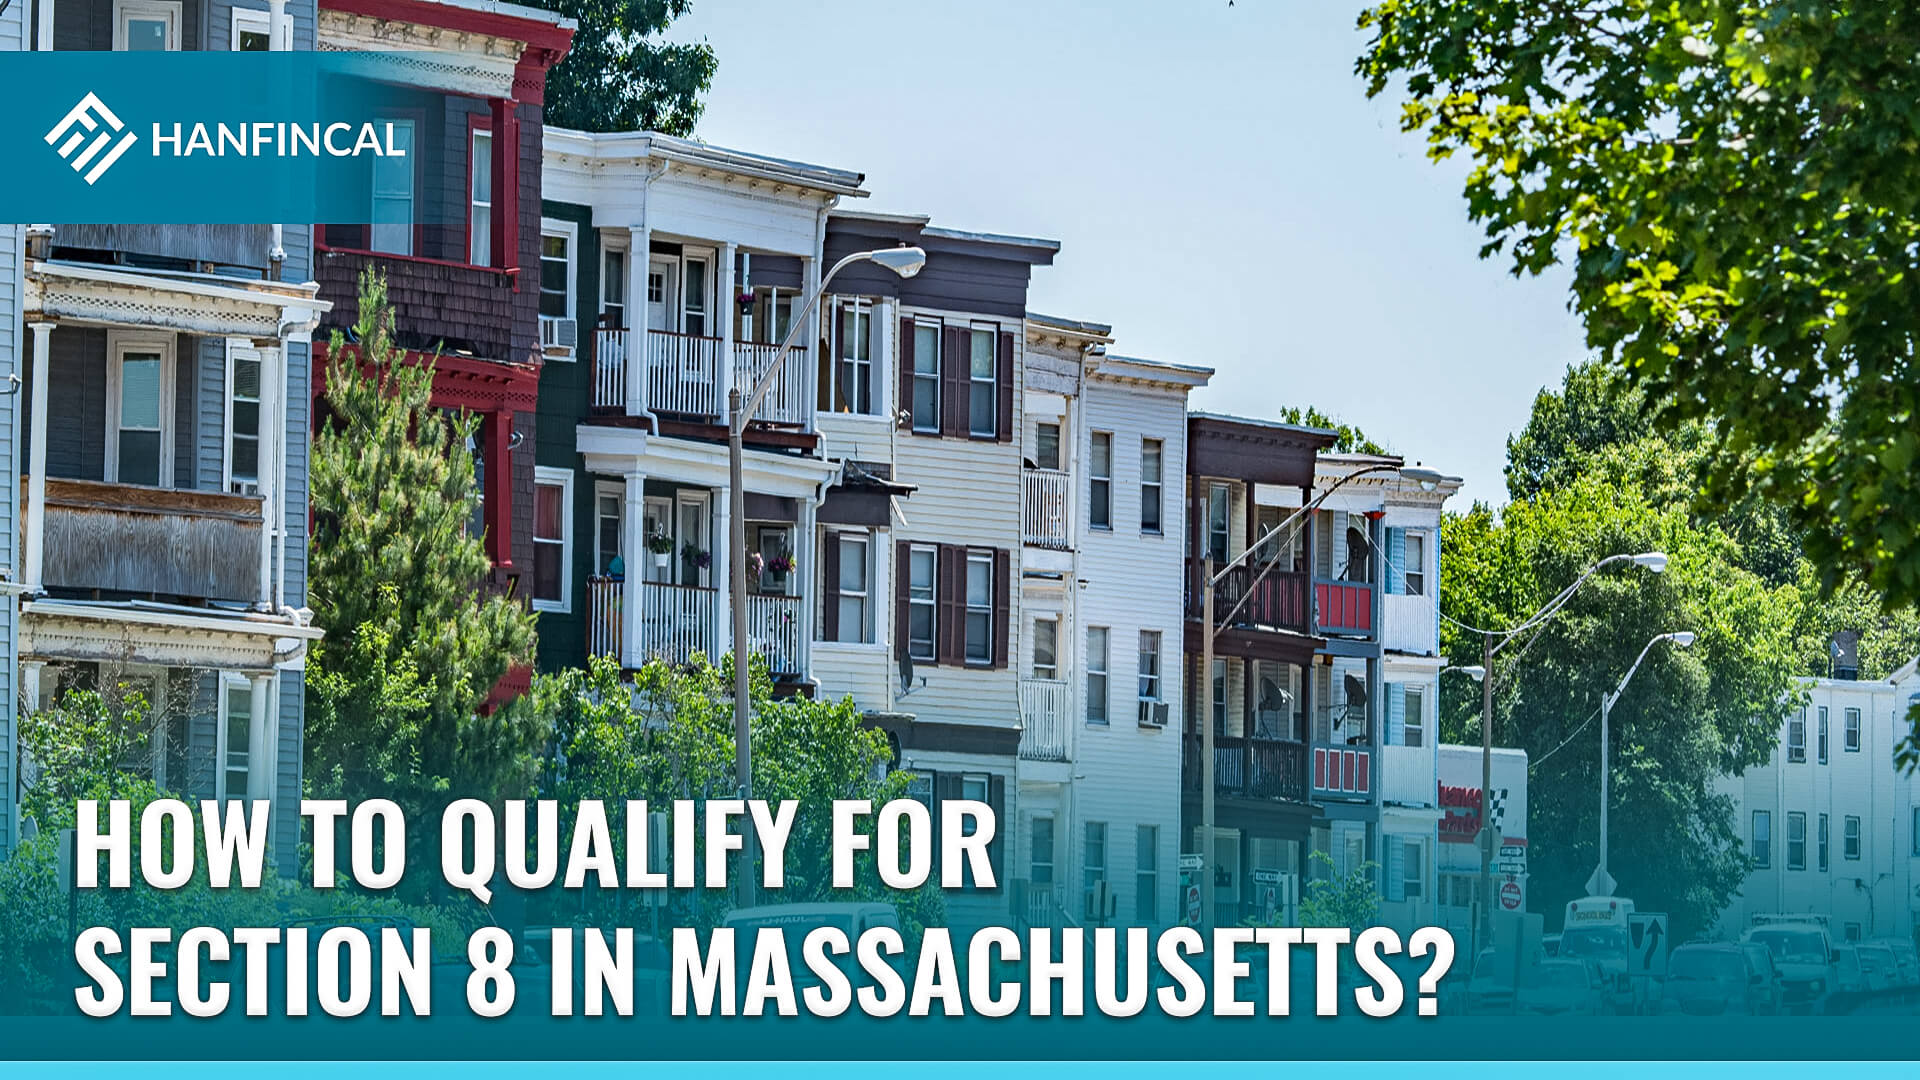 How to qualify for Section 8 in Massachusetts (Mass)?